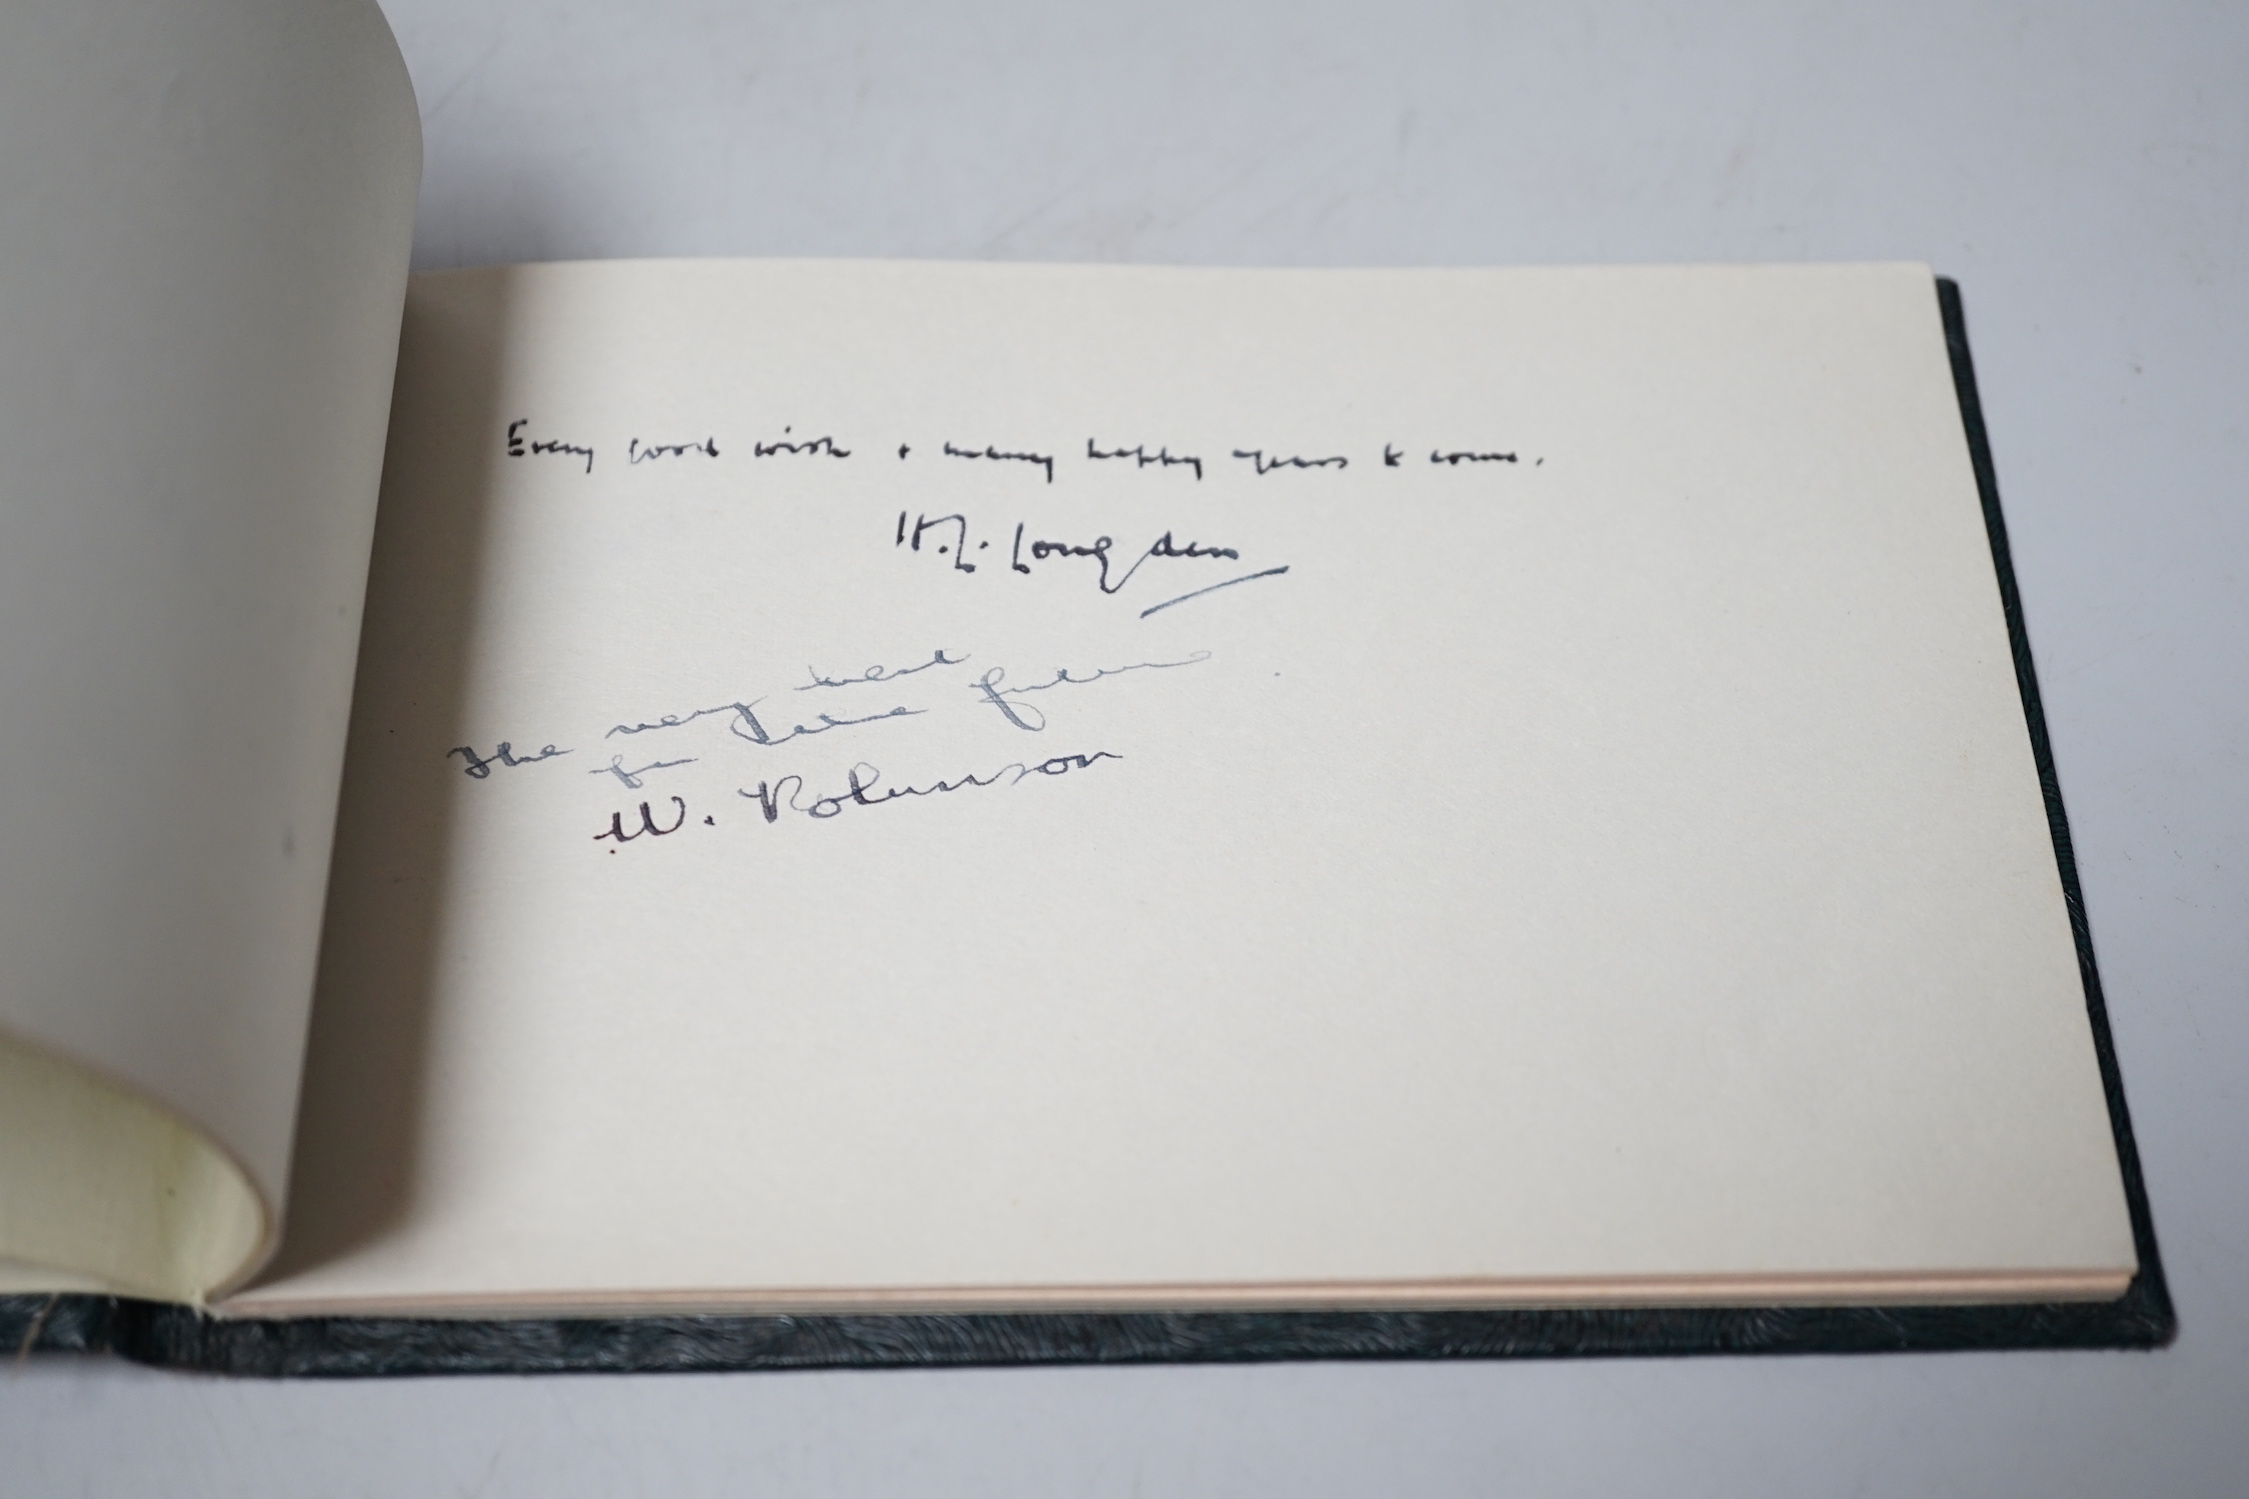 An Autograph book presented to EB Thomas esquire MBE, 4 January 1960 on the occasion of his retirement from public service with the Ministry of housing and local government, signed by his colleagues